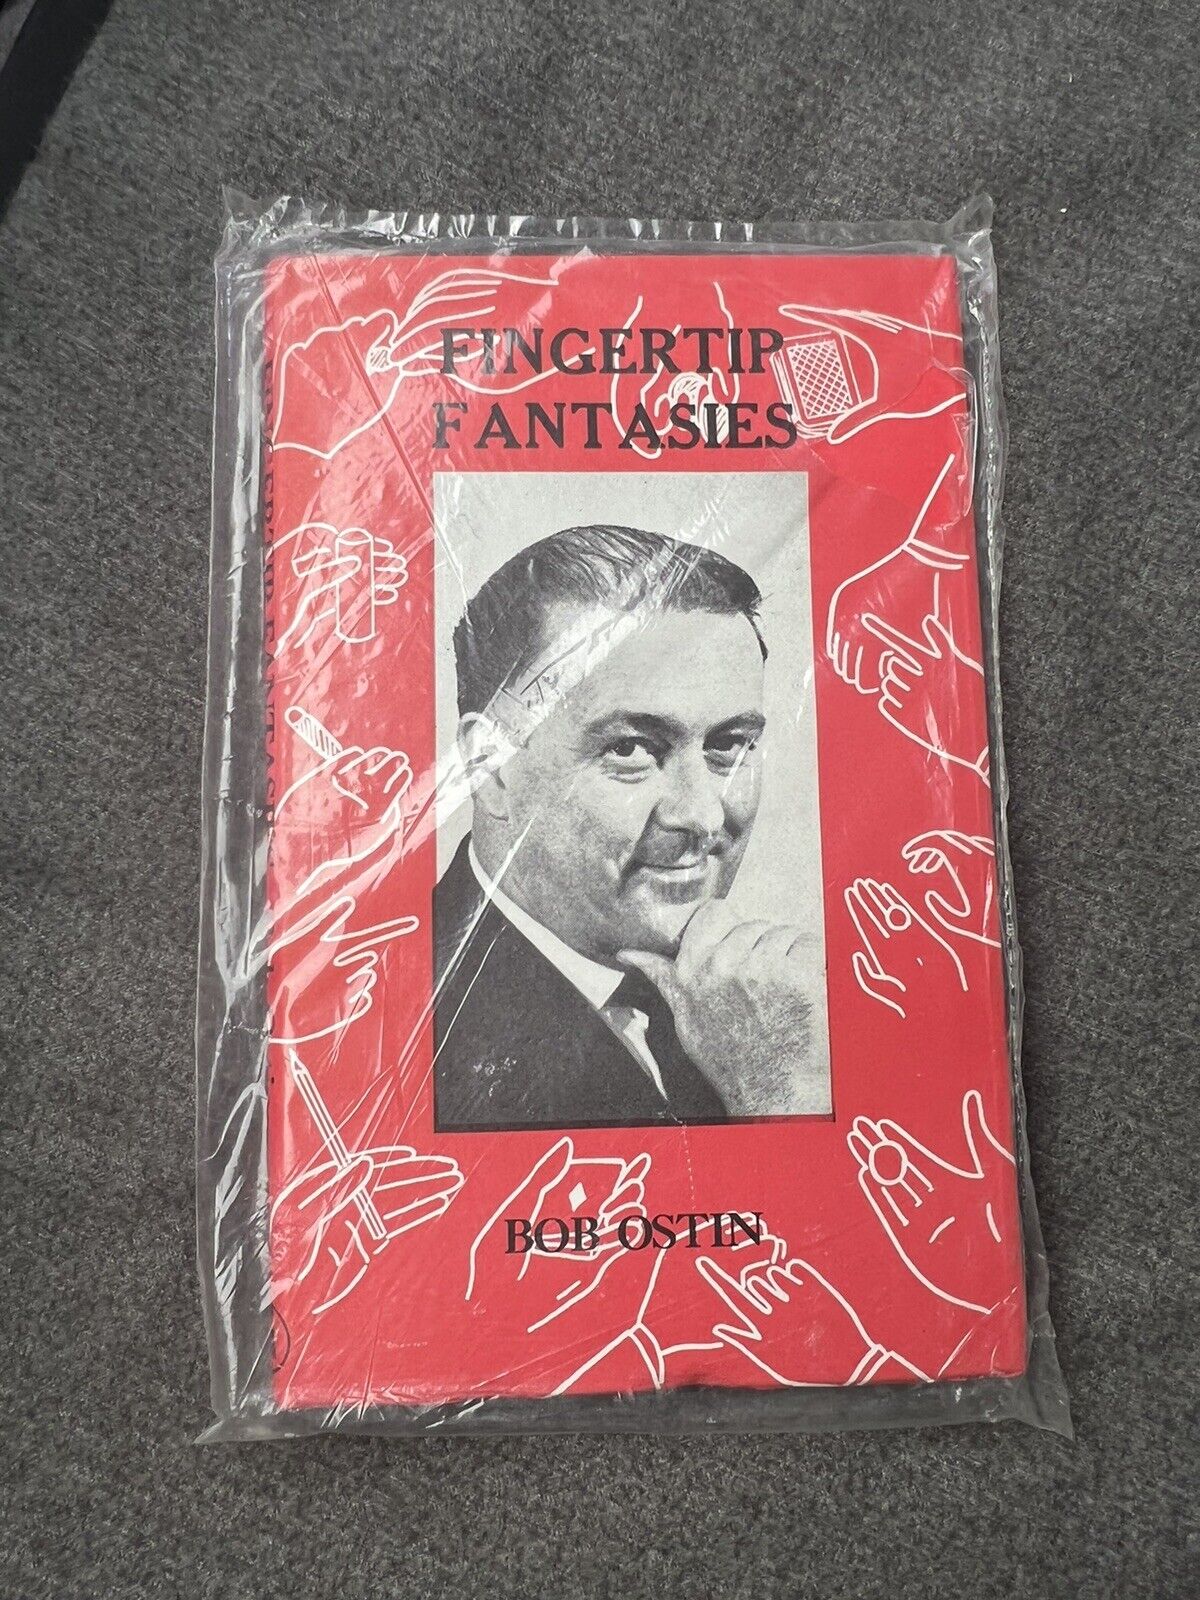 🔥Fingertip Fantasies (Limited/Out of Print) by Bob Ostin ￼Vintage Coin Magic🔥